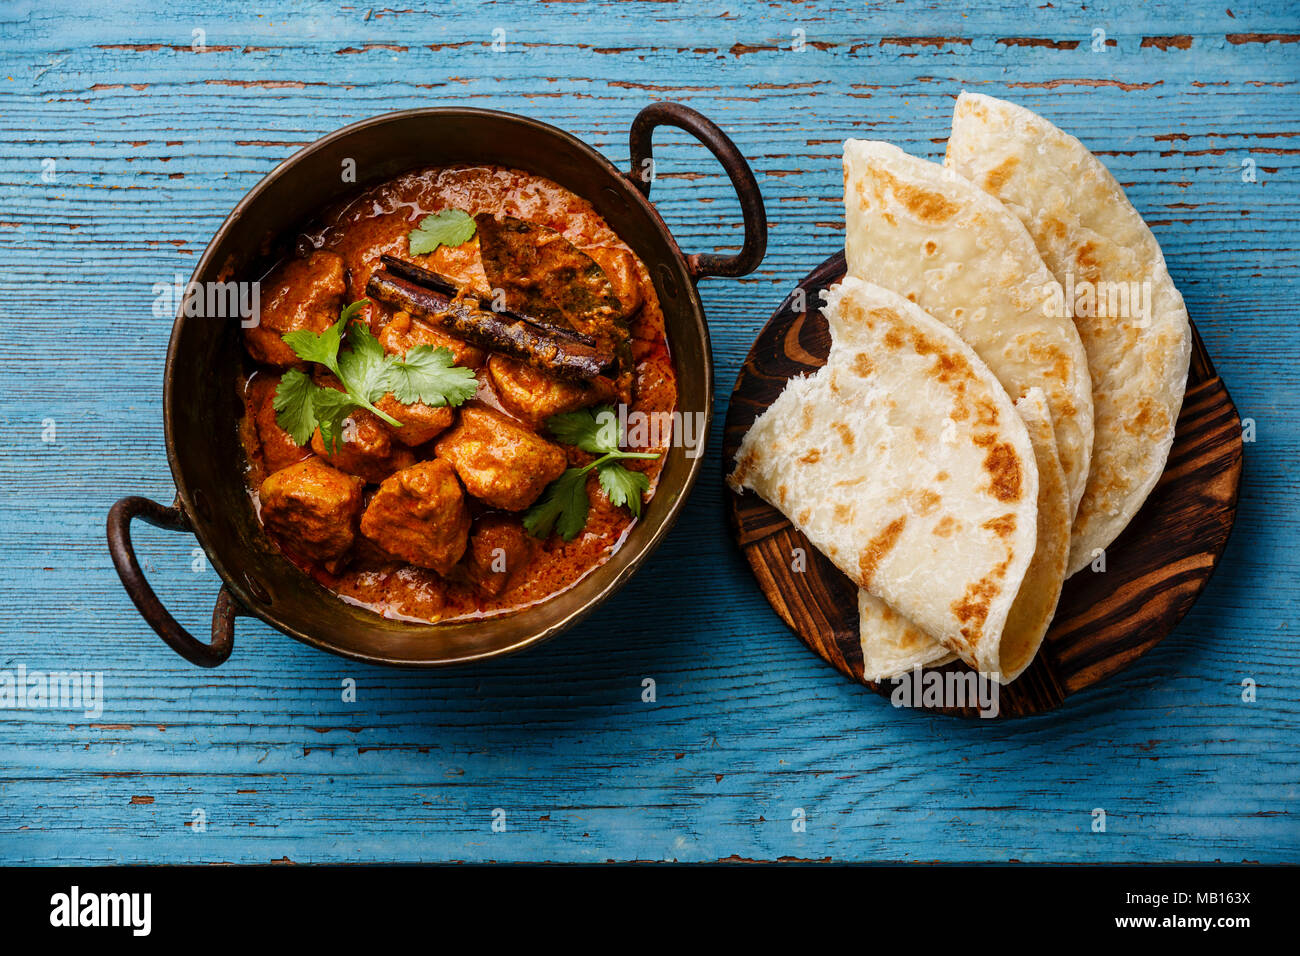 Tantalizing the Taste Buds with the Spicy and Aromatic Flavors of Indian Food GIFs